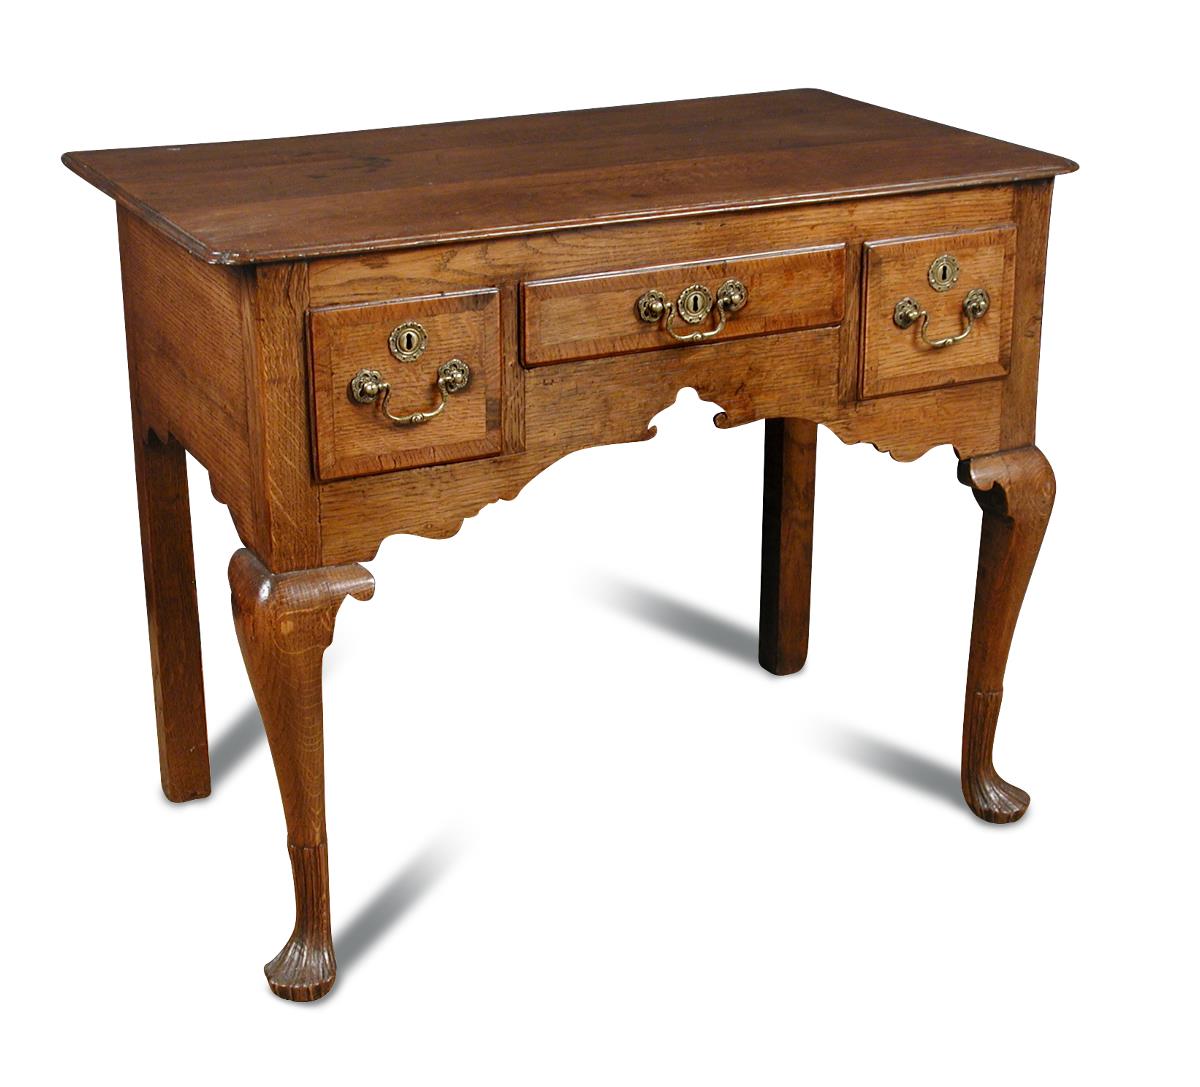 An 18th century oak Low boy, with re-entrant corners, three small drawers, on cabriole legs and